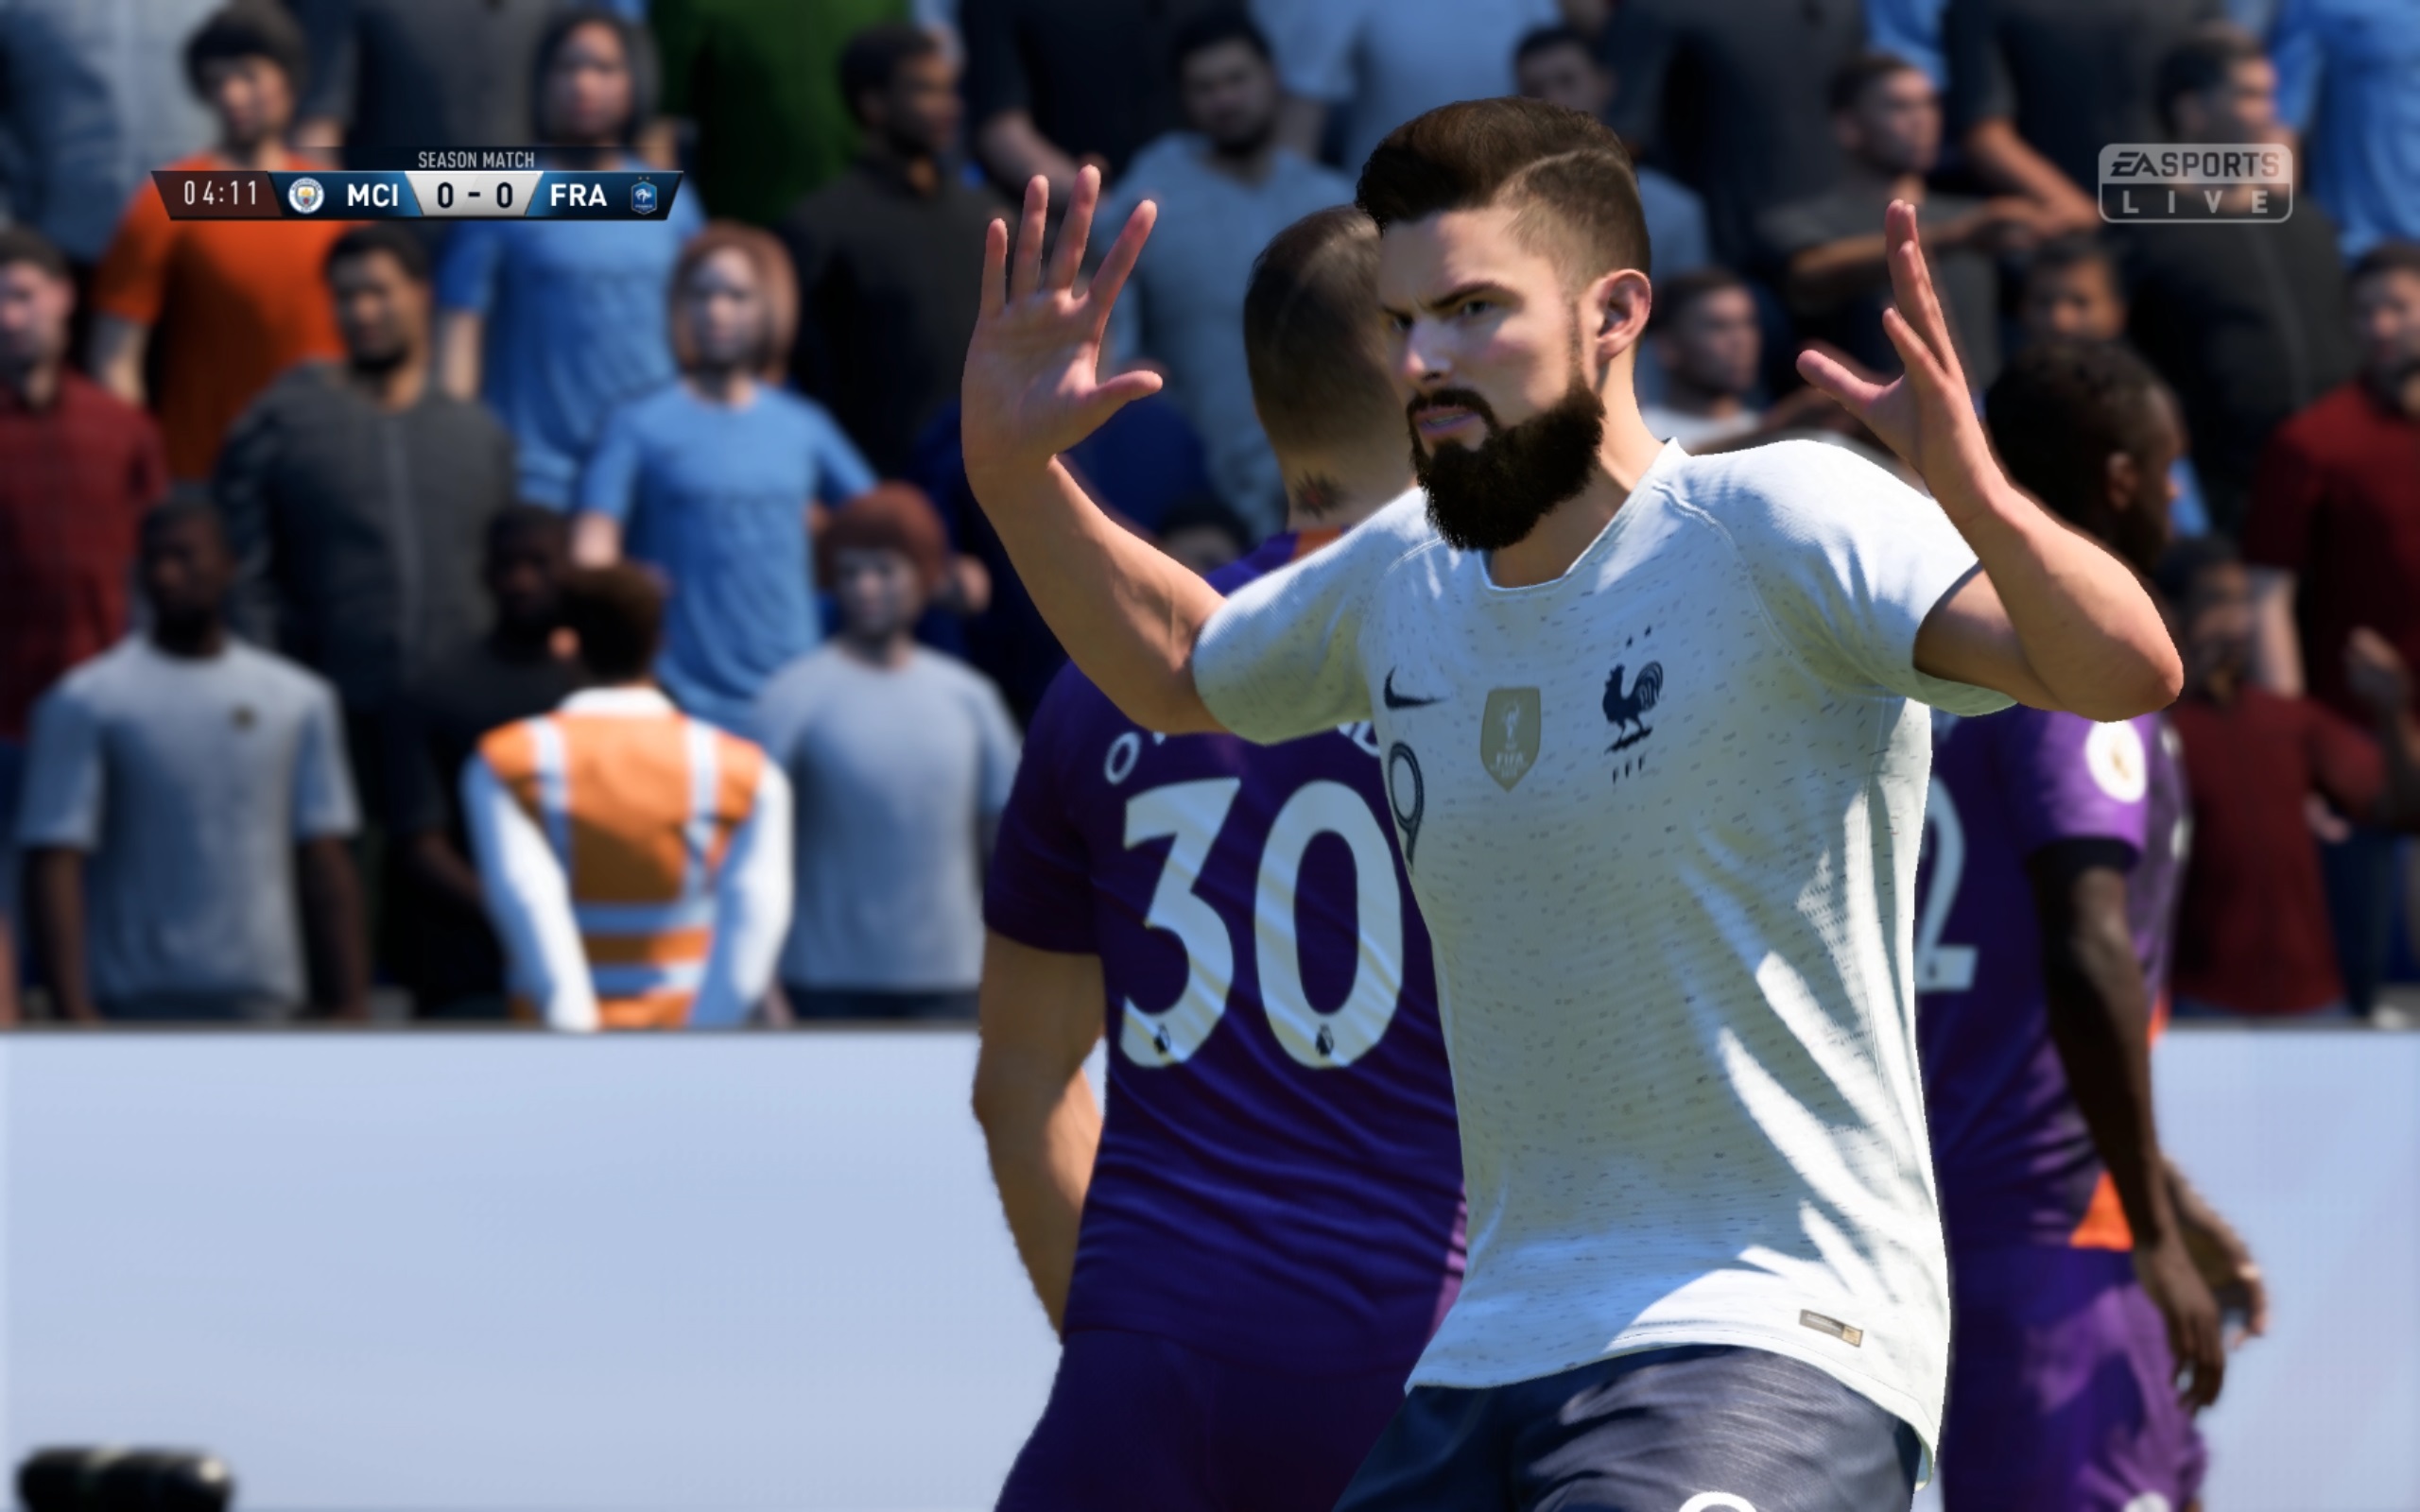  Electronic Arts faces €10 million fine over FIFA loot boxes in the Netherlands 